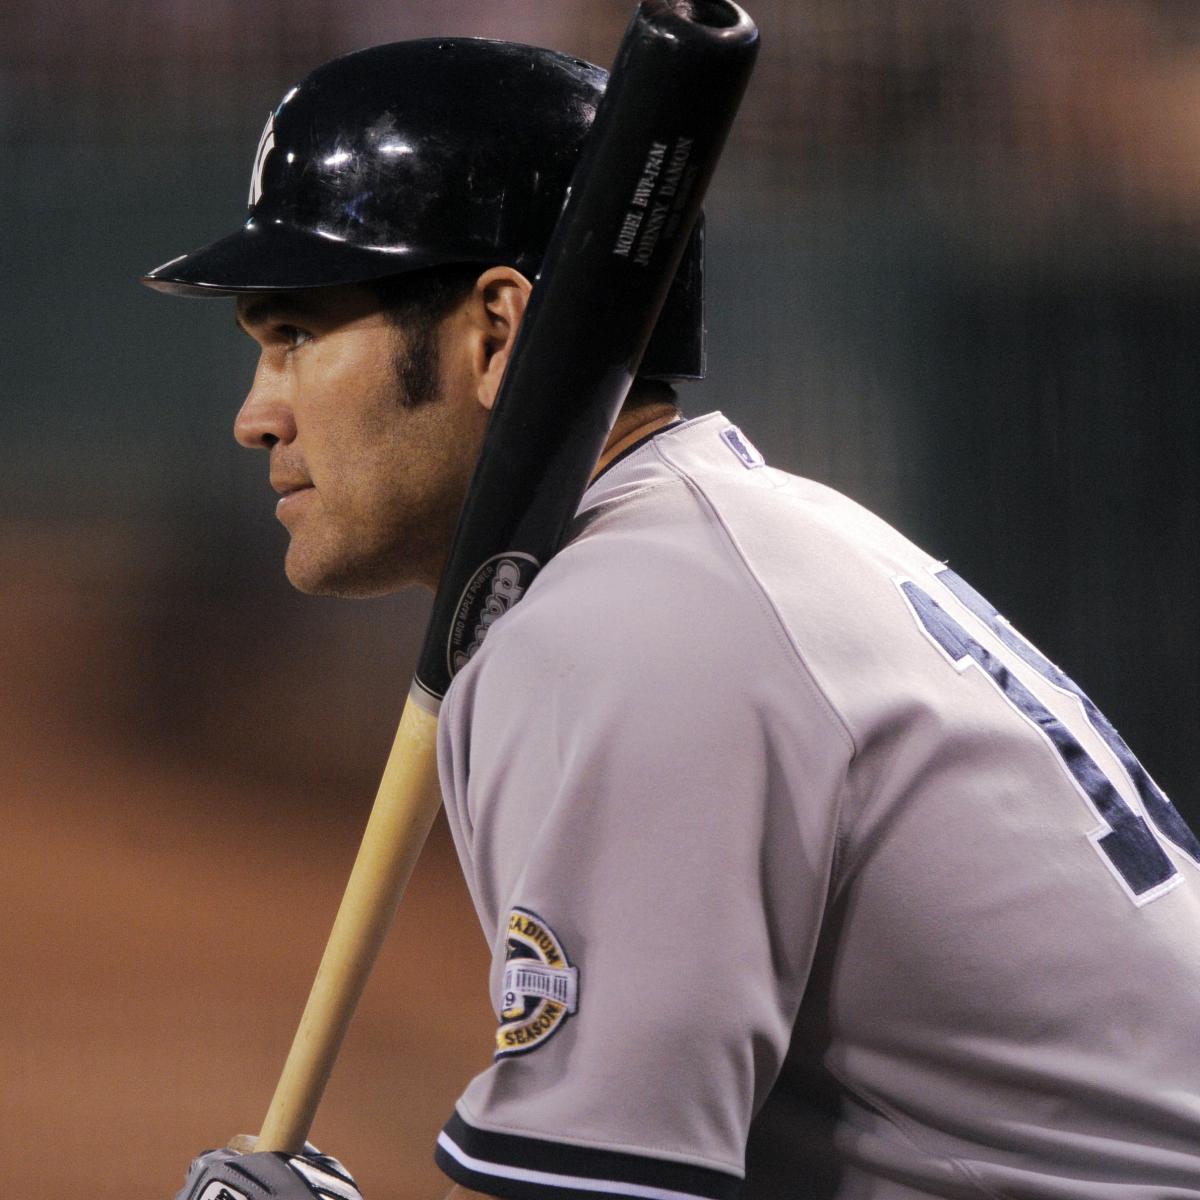 Former New York Yankee Johnny Damon reaches $8 million deal with